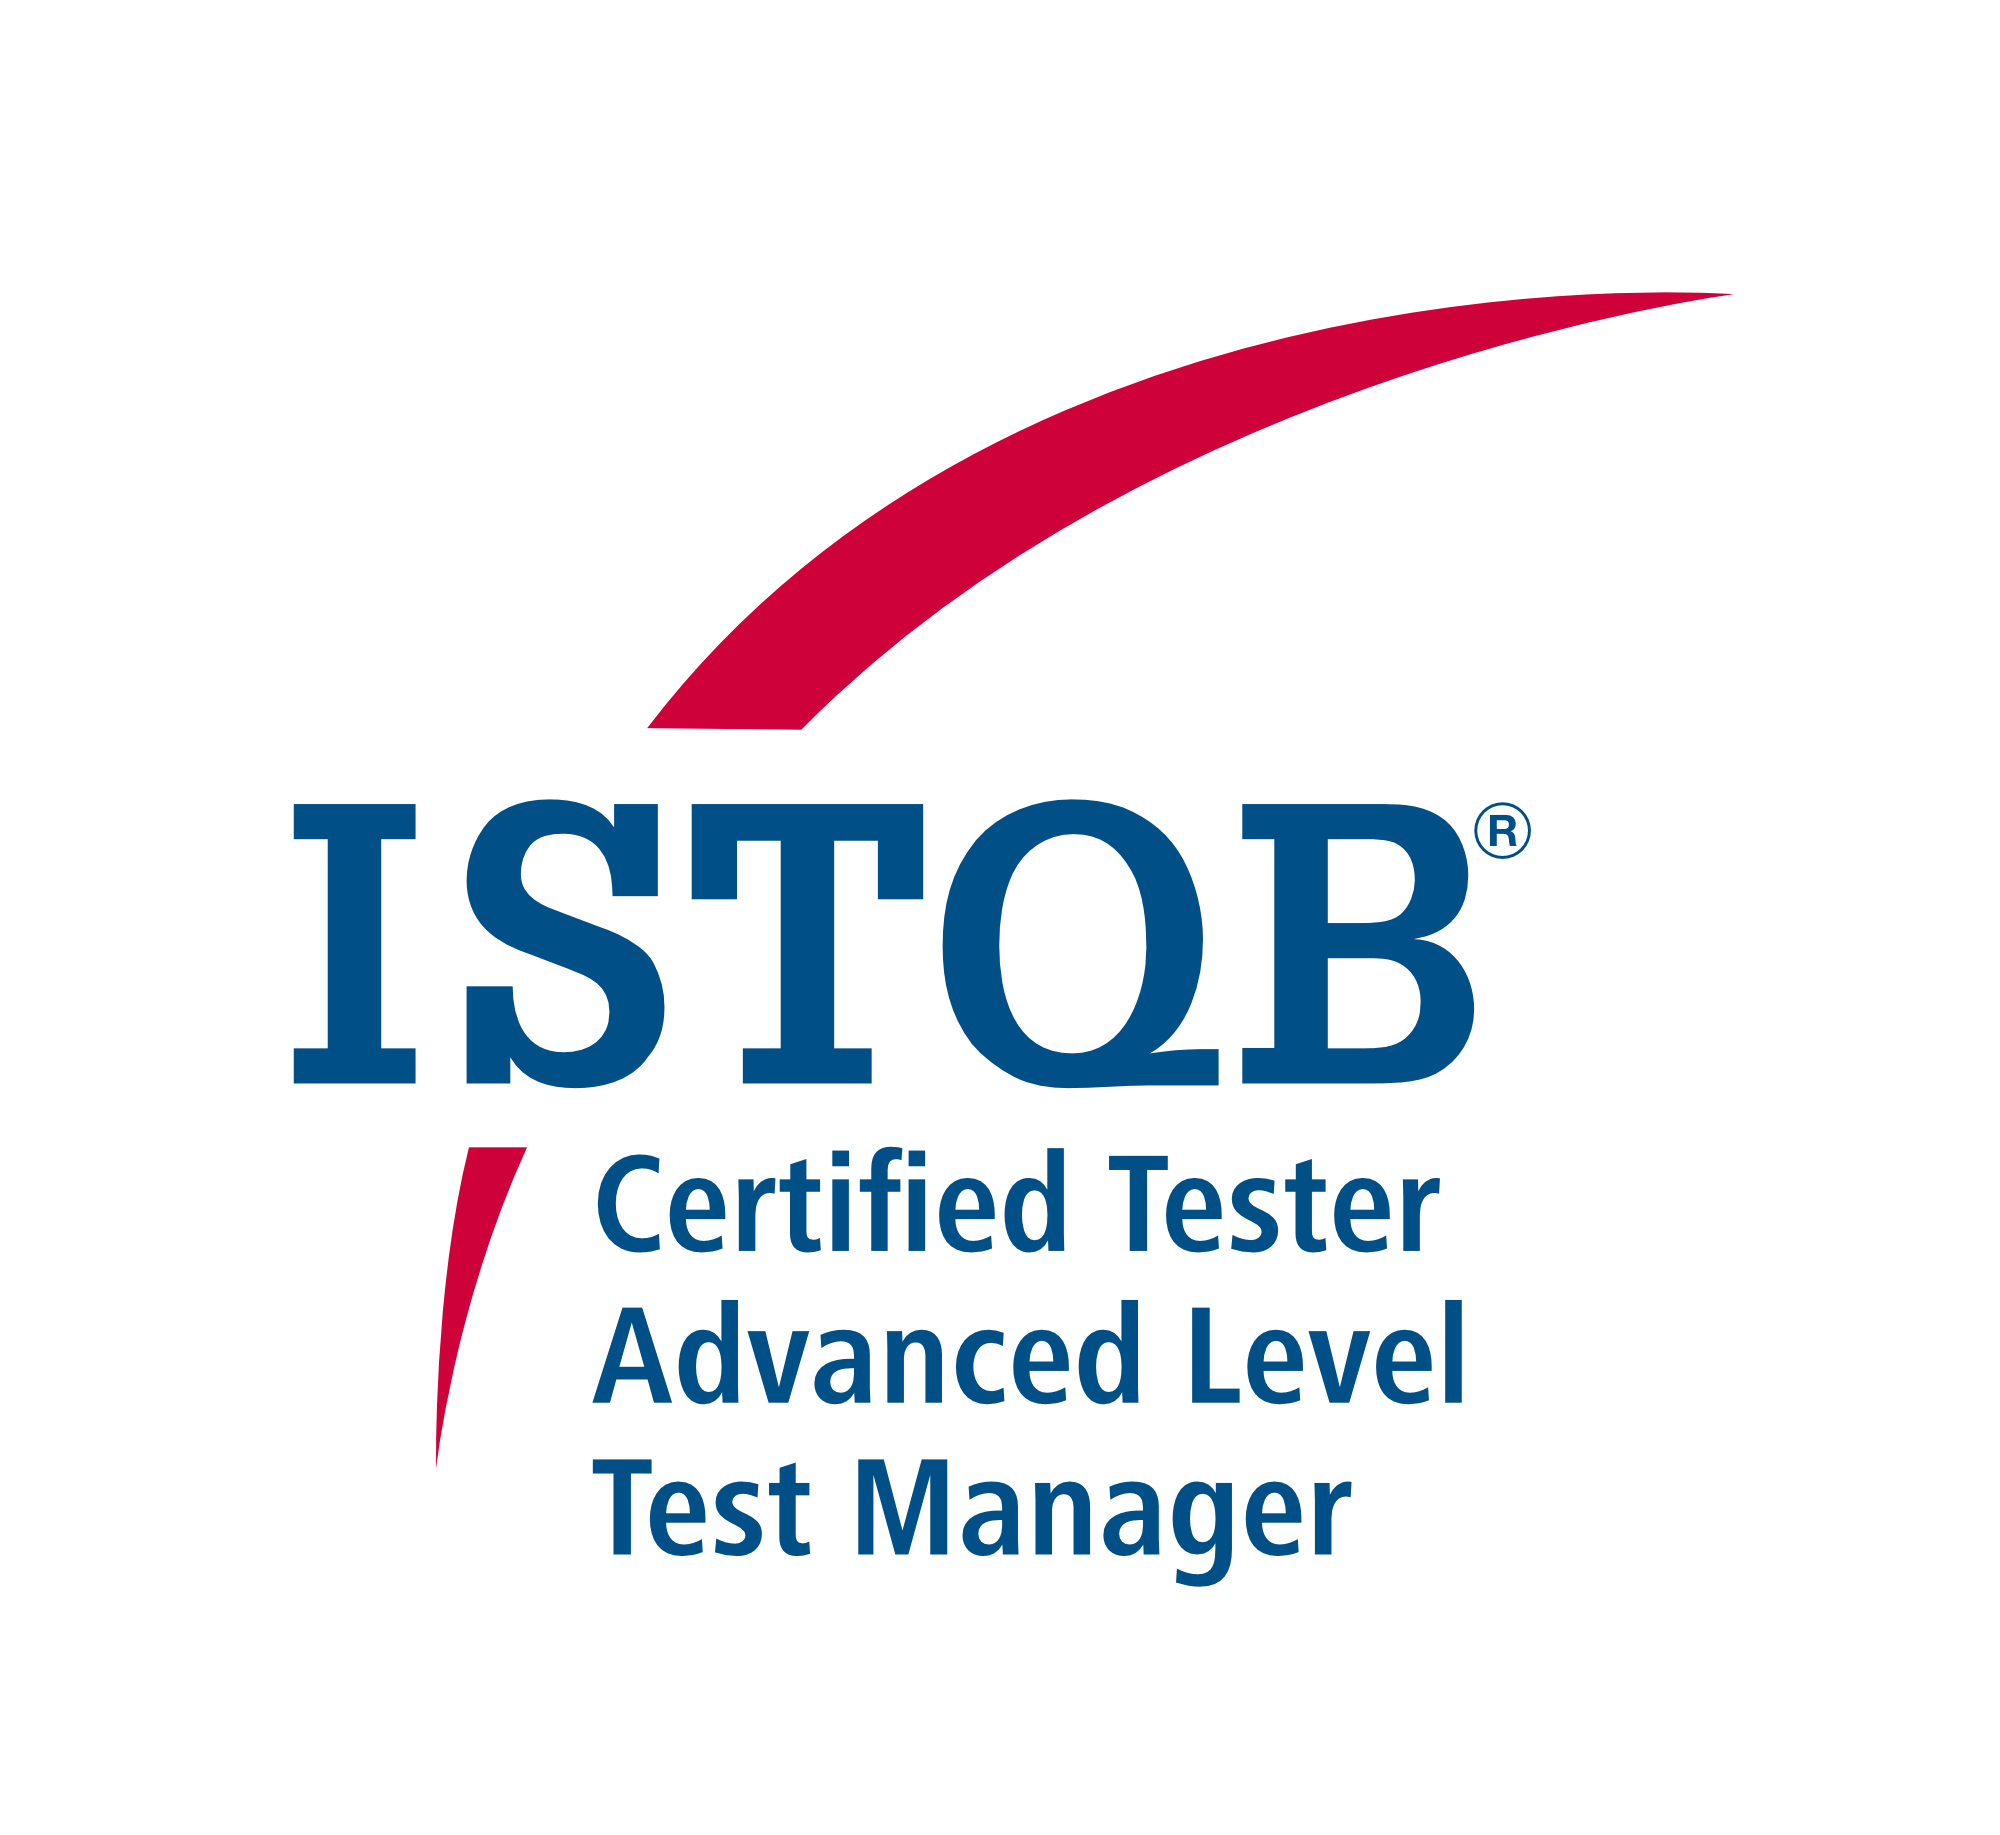 
			ISTQB Certified Tester Advanced Level - Test Manager
		